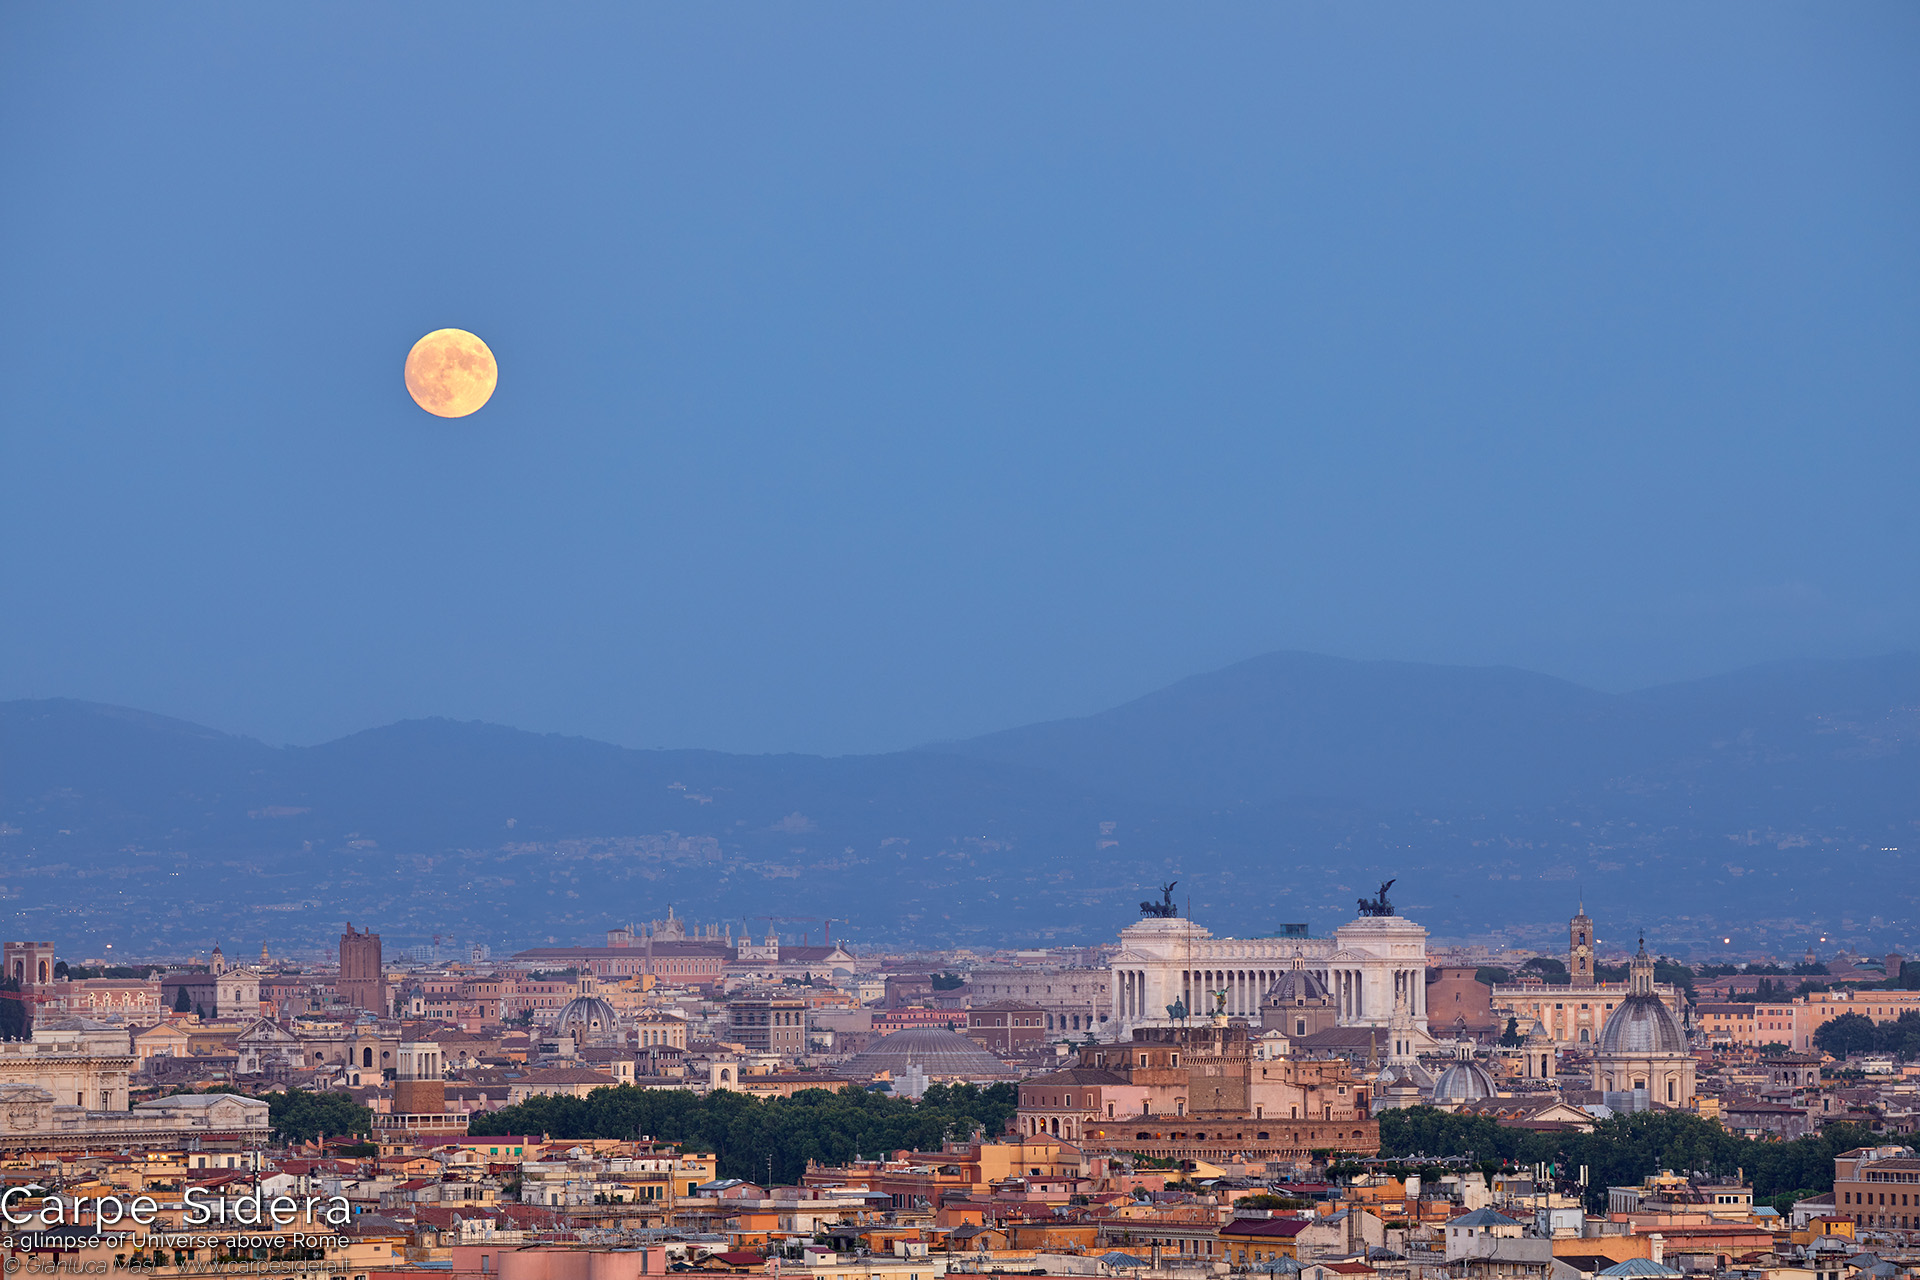 18. The summer full Moon rises above the Eternal City, at sunset.